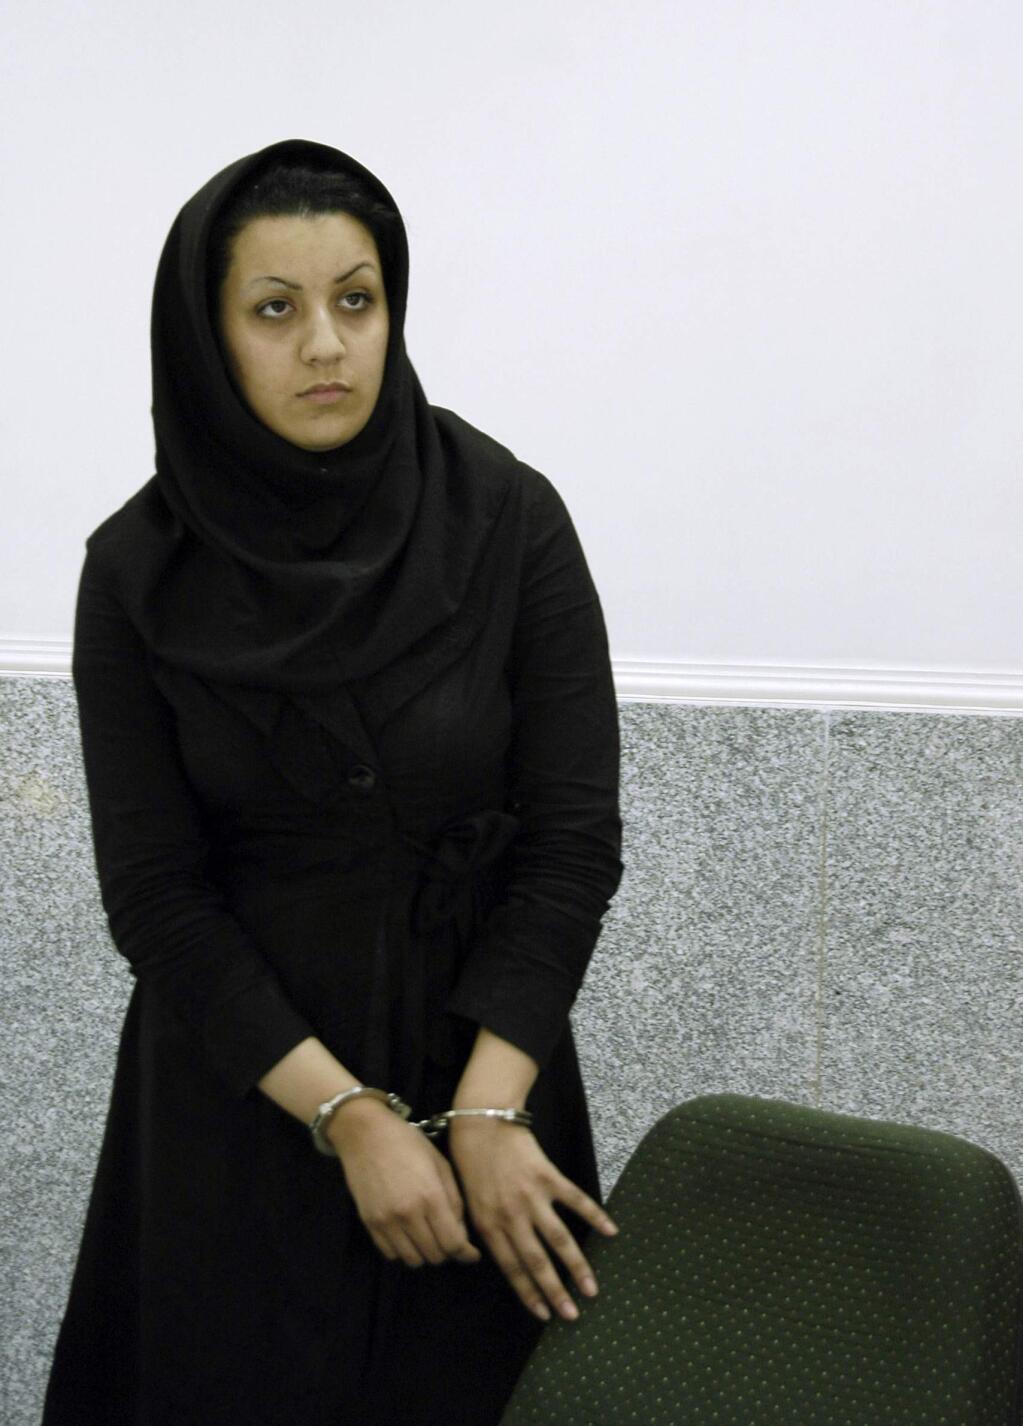 In this picture taken on July 8, 2007, Iranian Reyhaneh Jabbari stands handcuffed in a police office in Tehran, Iran. Jabbari was hanged on Saturday, Oct. 25, 2014, who was convicted of murdering a man she said was trying to rape her, the official IRNA news agency reported. (AP Photo/Golara Sajjadian)